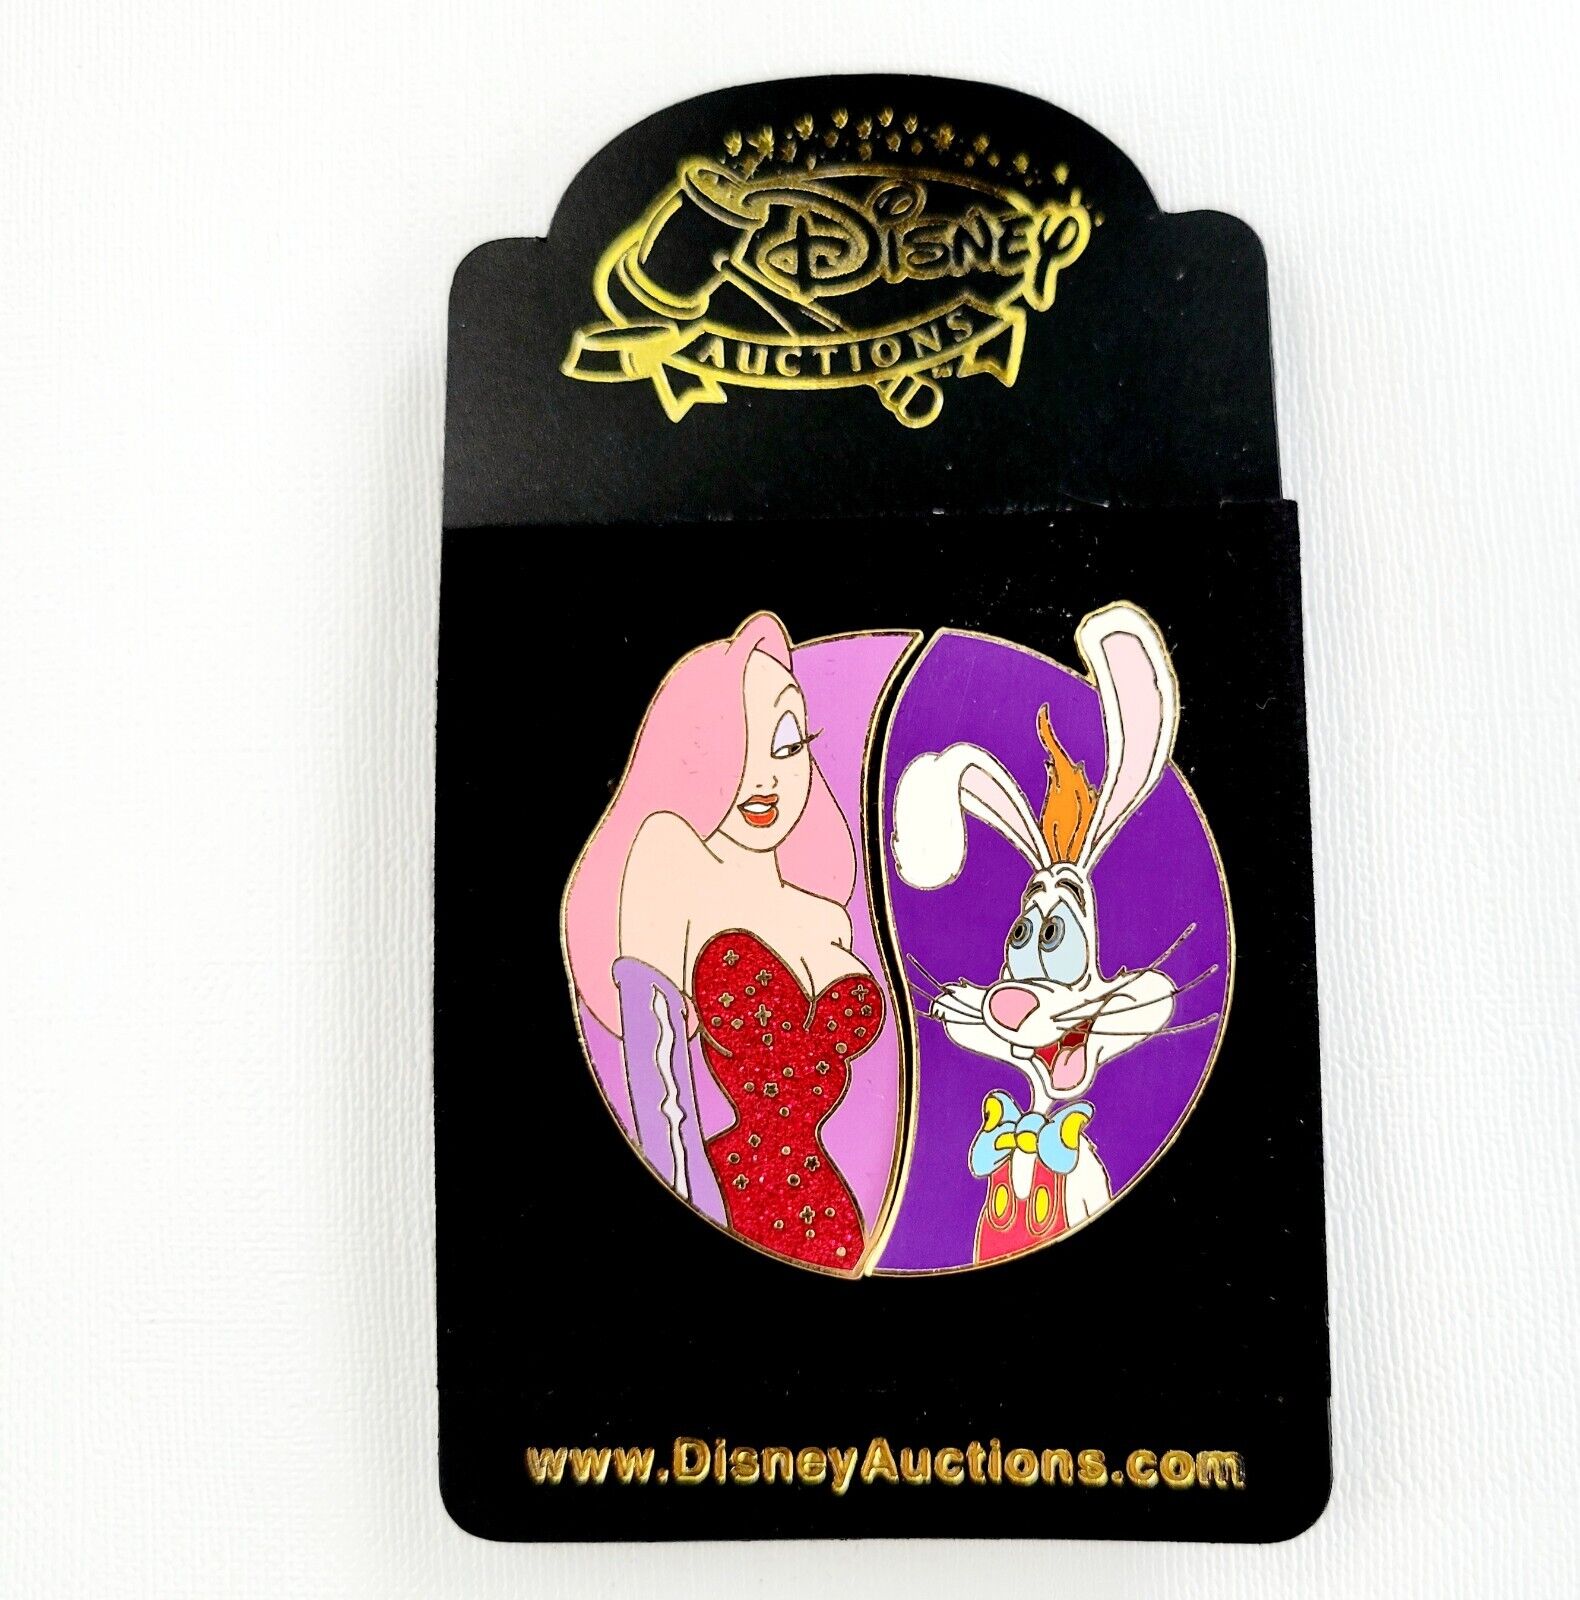 2004 Disney Auctions Roger and Jessica Friendship LE 500 2 Two Pin Set NIP